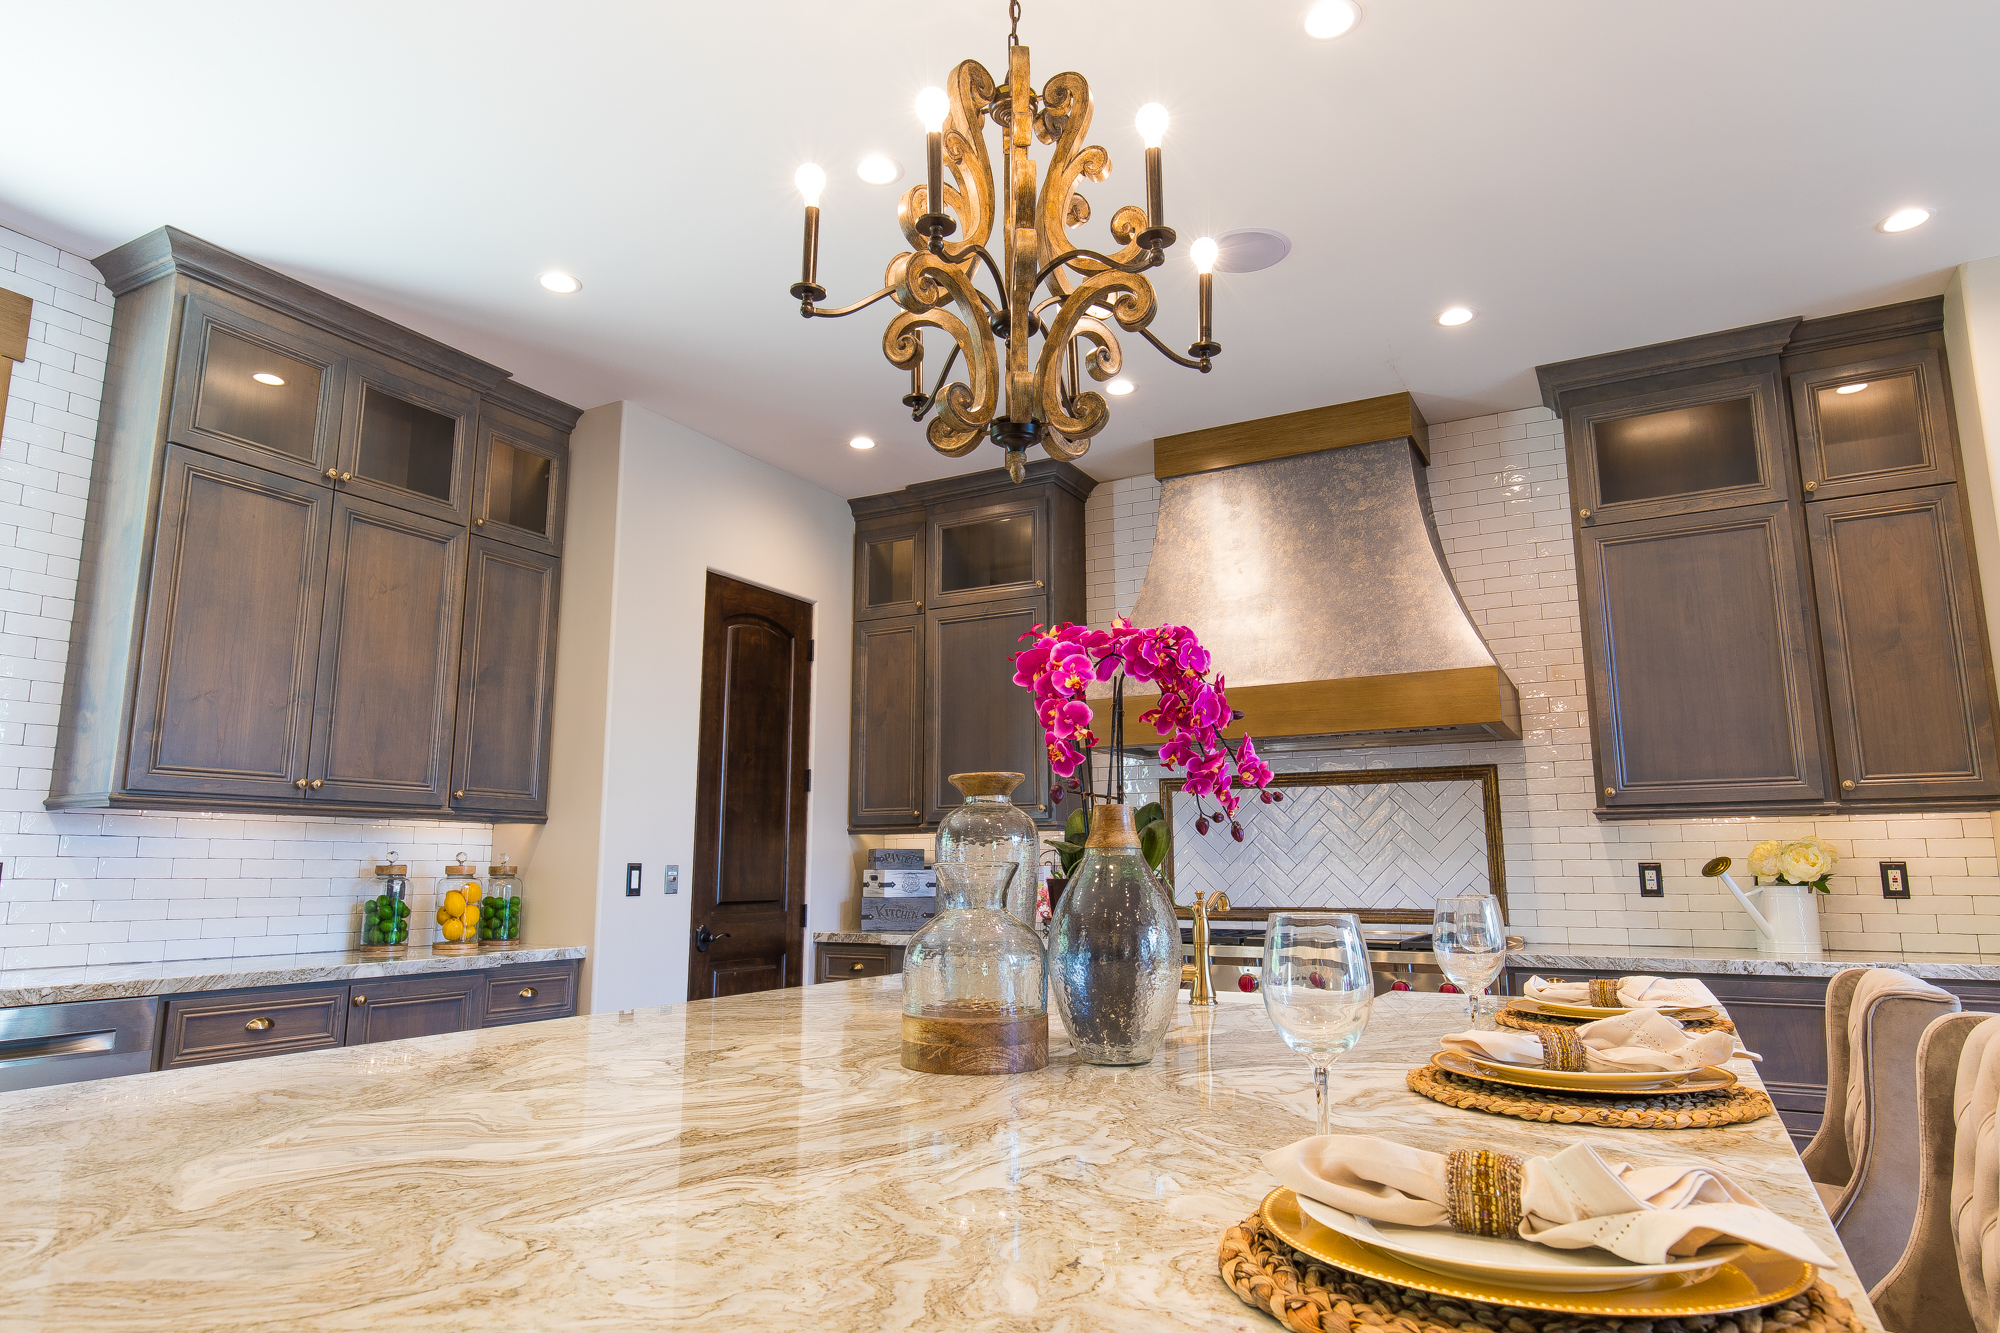  Pristine European White Oak hardwood floors, recessed lighting, in-ceiling speakers and a richly textured six light candle style renaissance patina chandelier finish the kitchen beautifully 